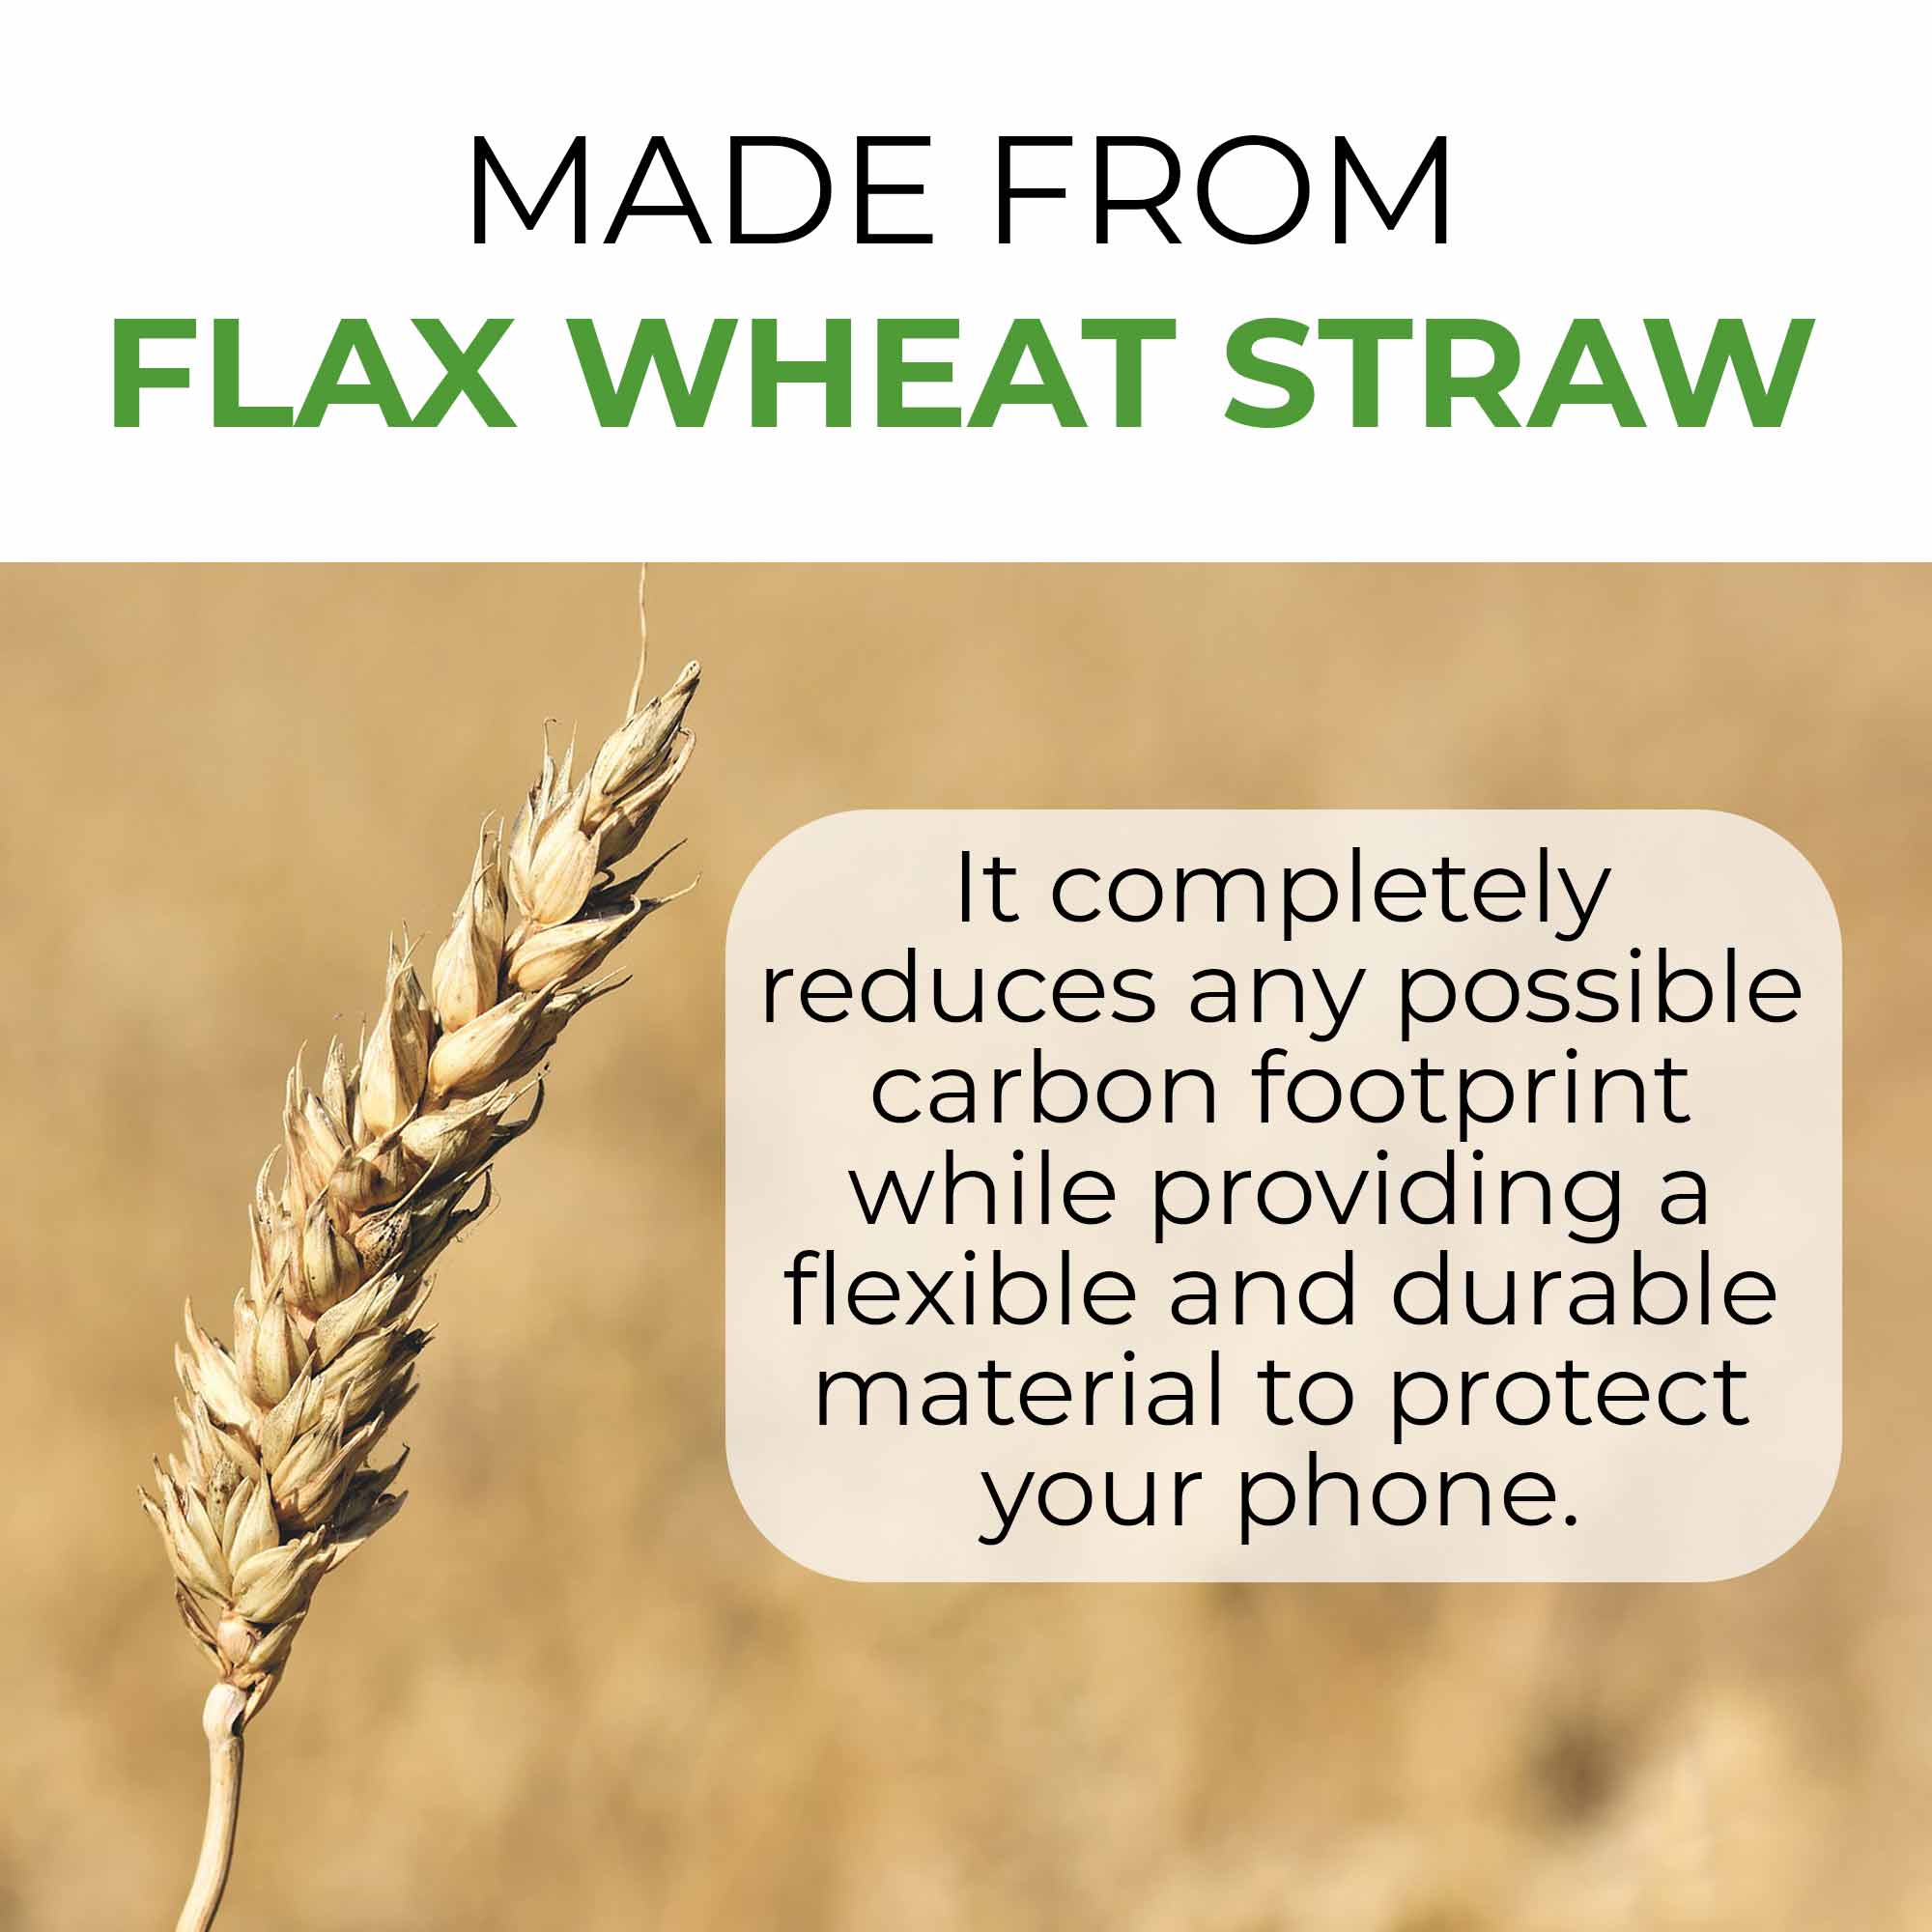 Biodegradable Frame Made out of Wheat